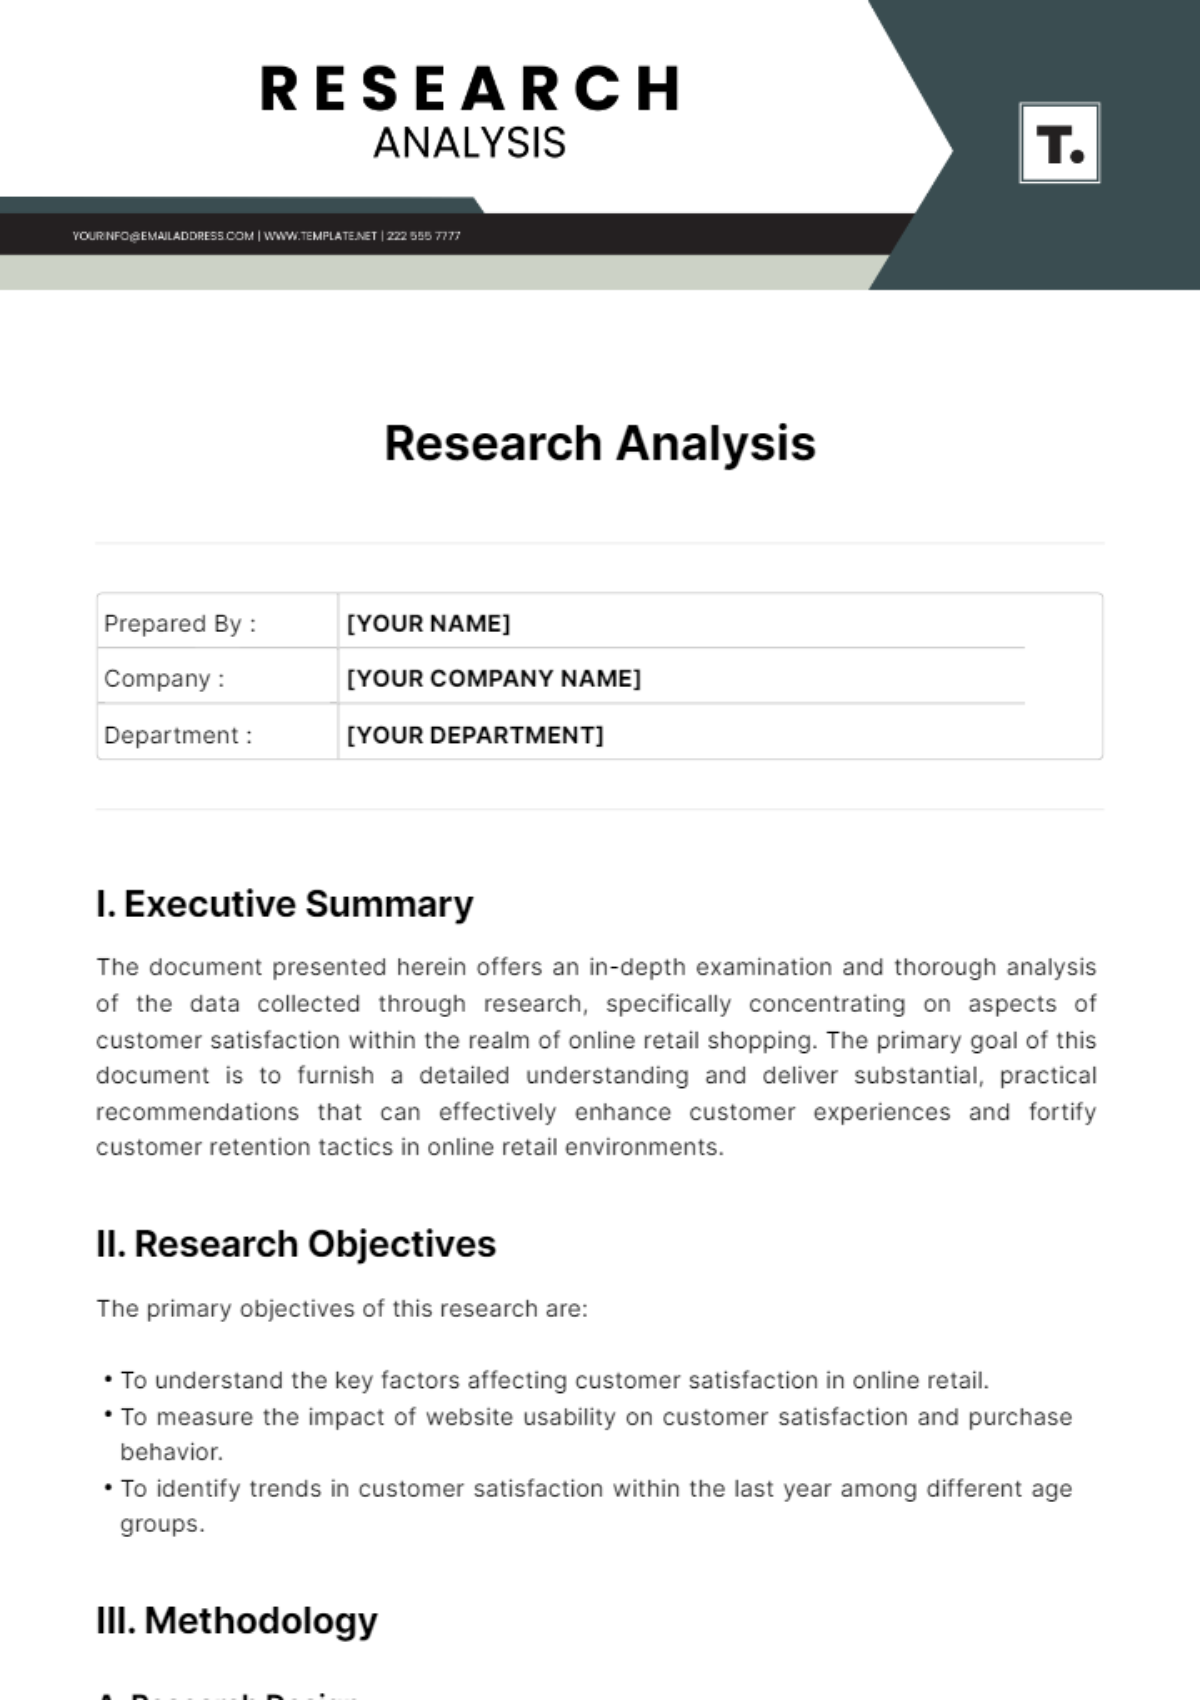 Research Analysis Template